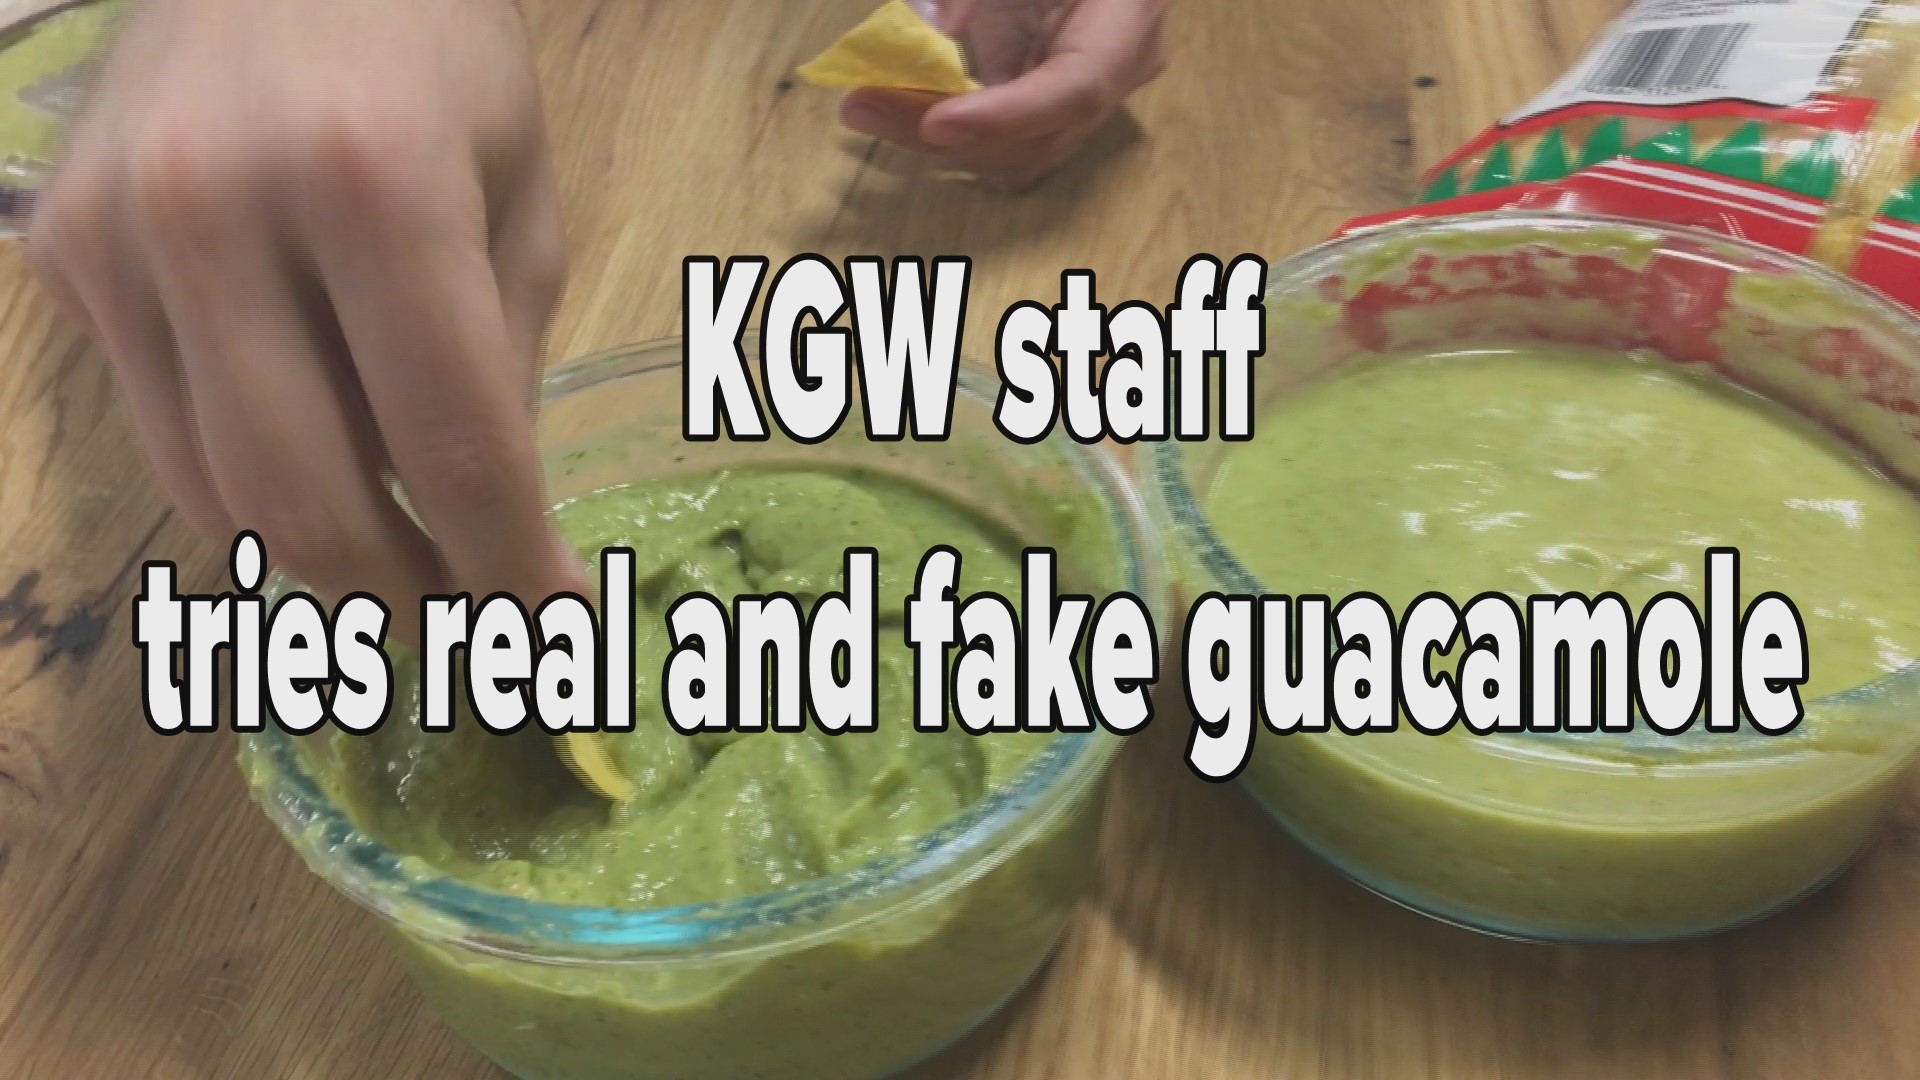 Can the KGW newsroom tell the difference between real and fake guac?